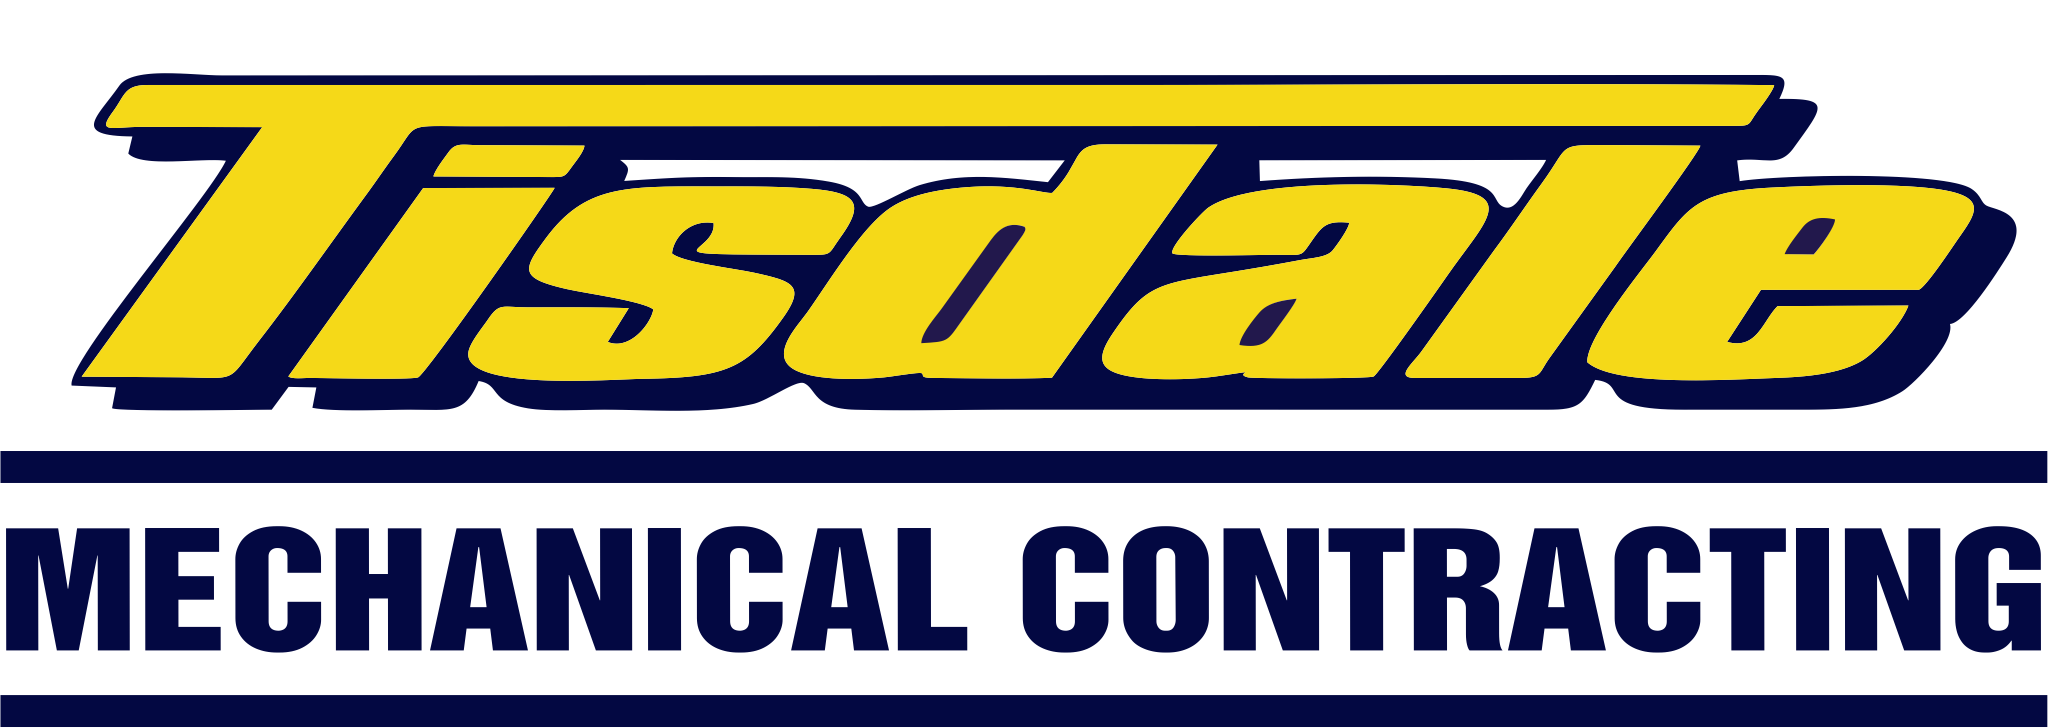 Tisdale Mechanical Contracting Ltd.